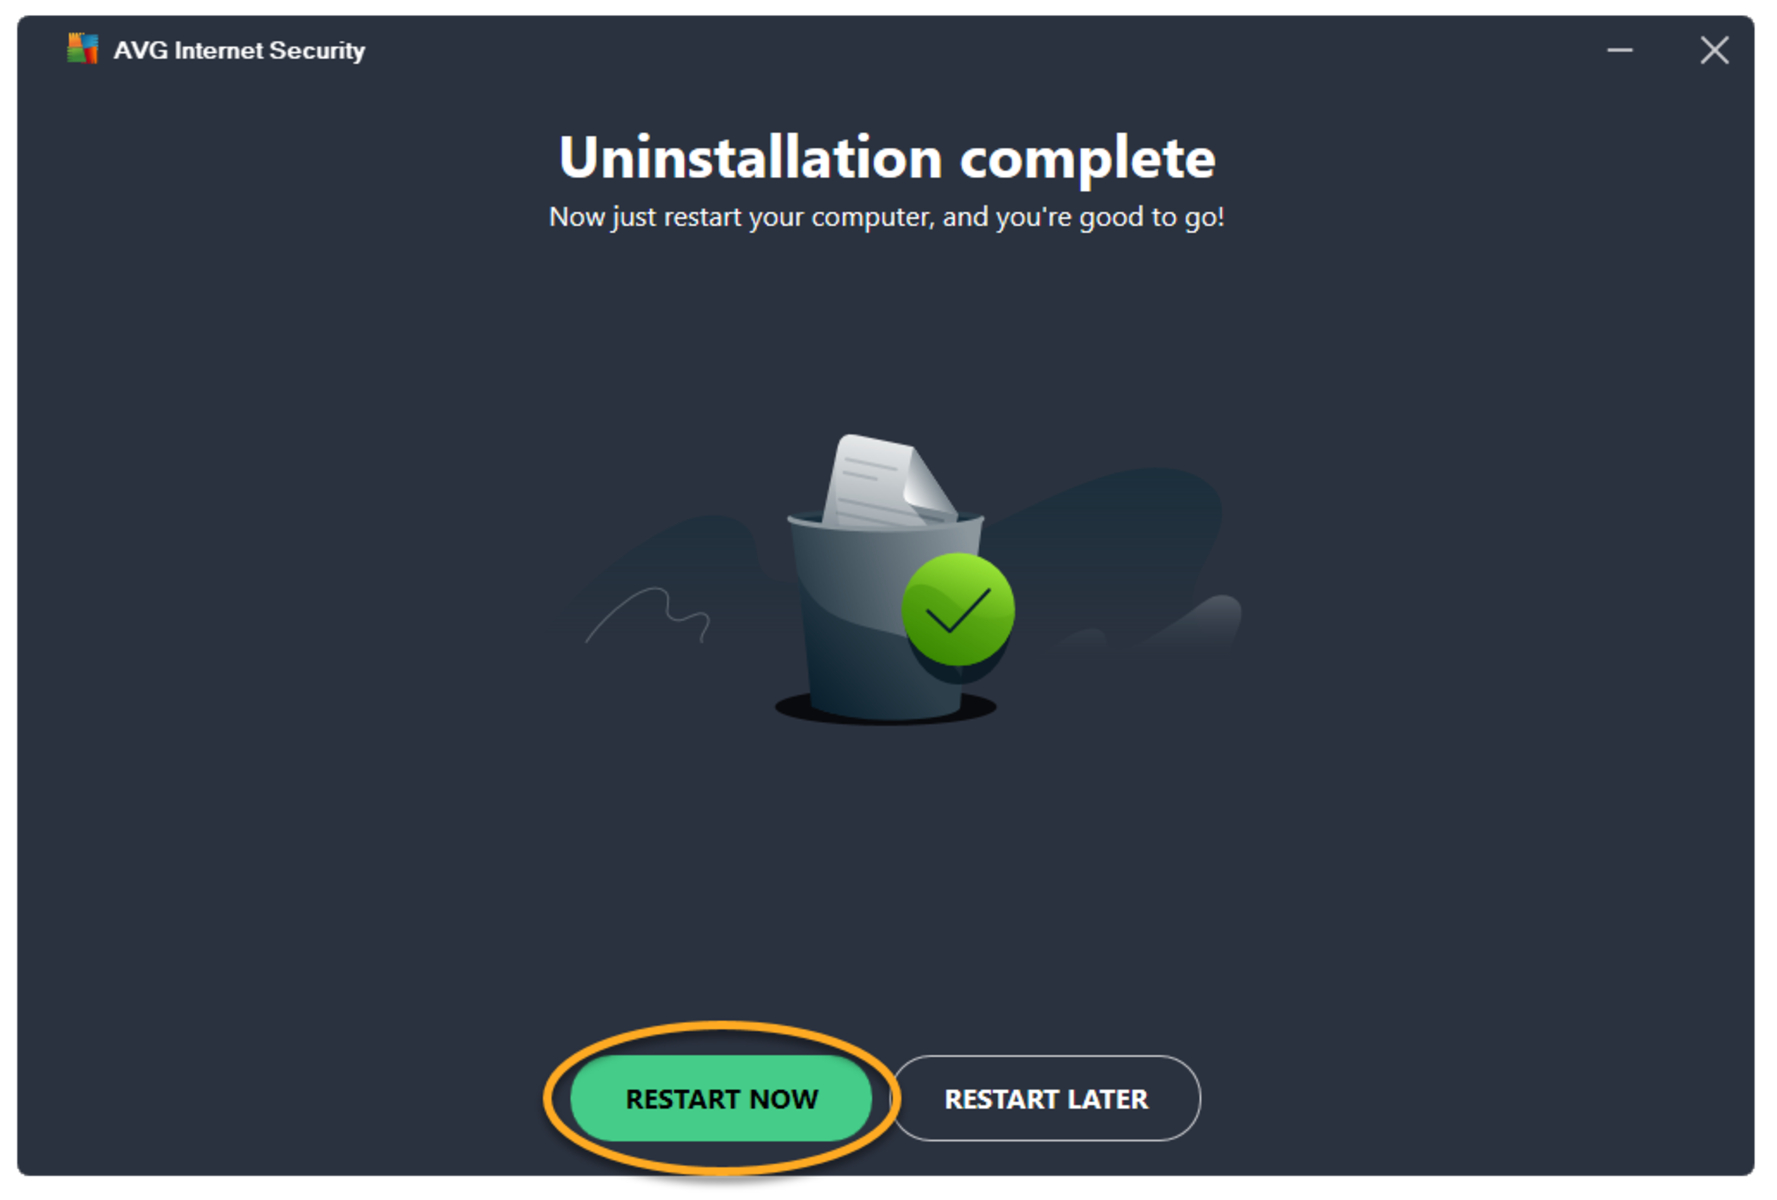 How To Uninstall AVG Internet Security